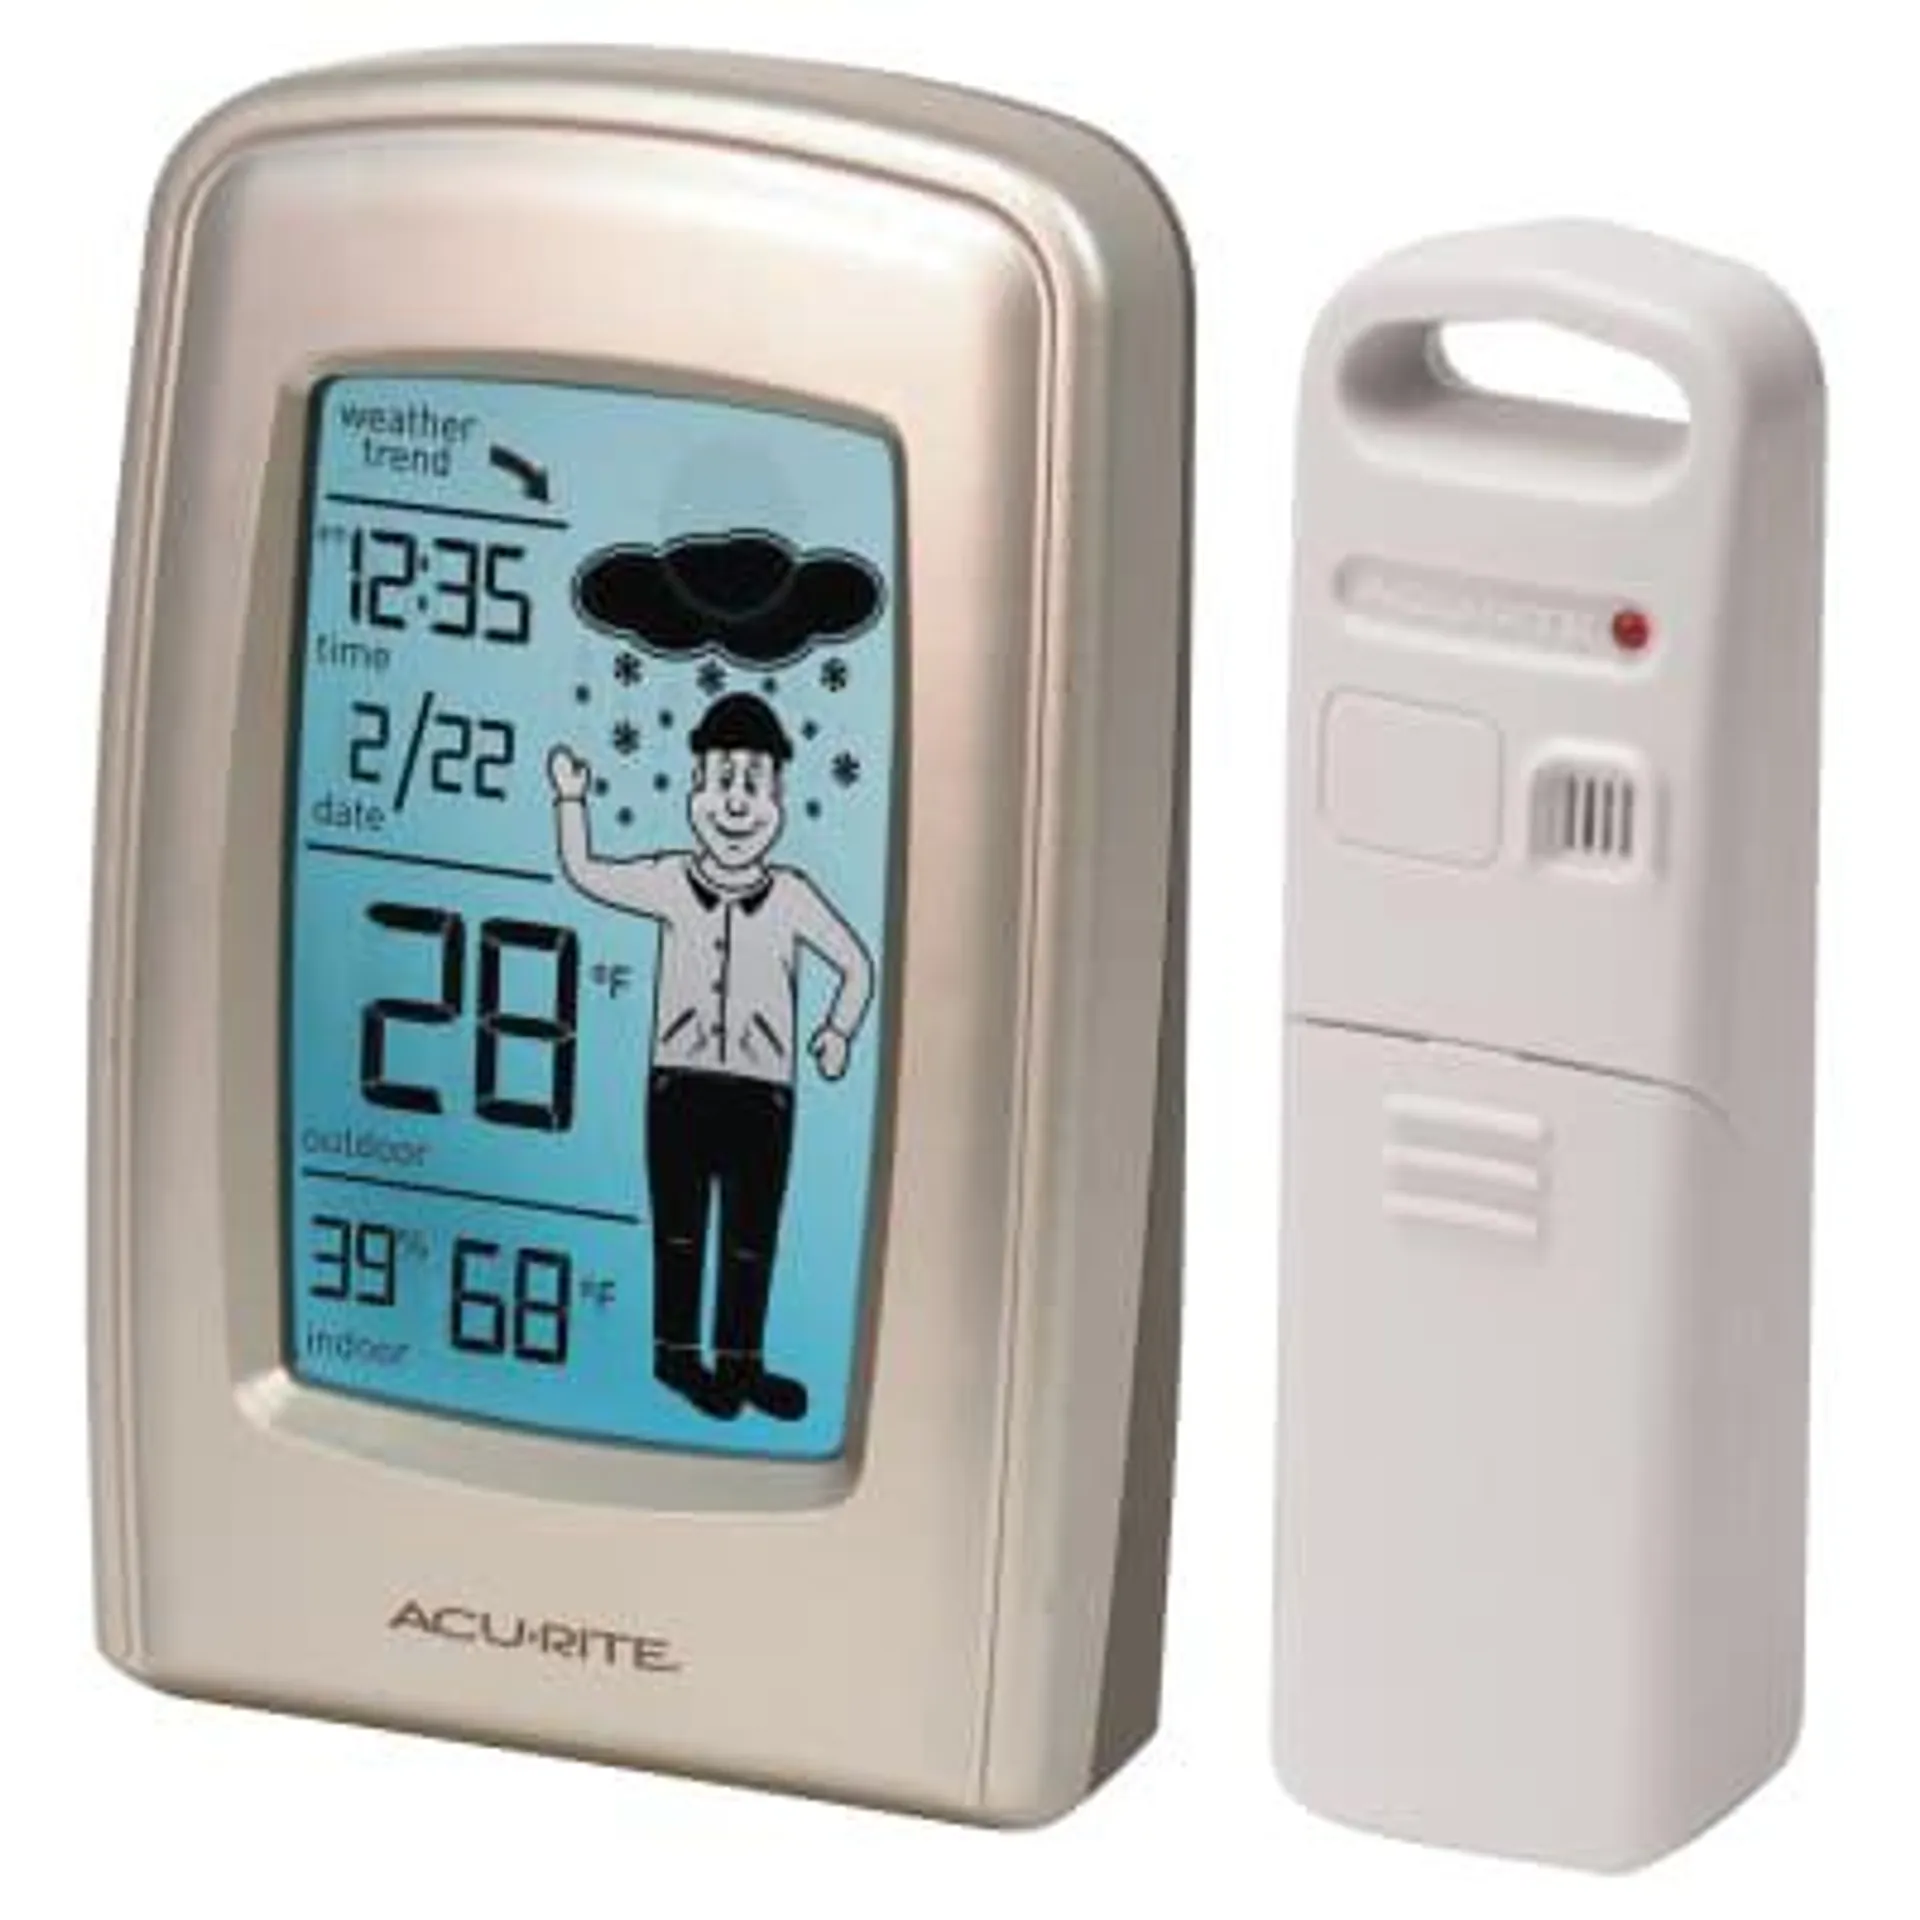 AcuRite What-To-Wear Digital Weather Station